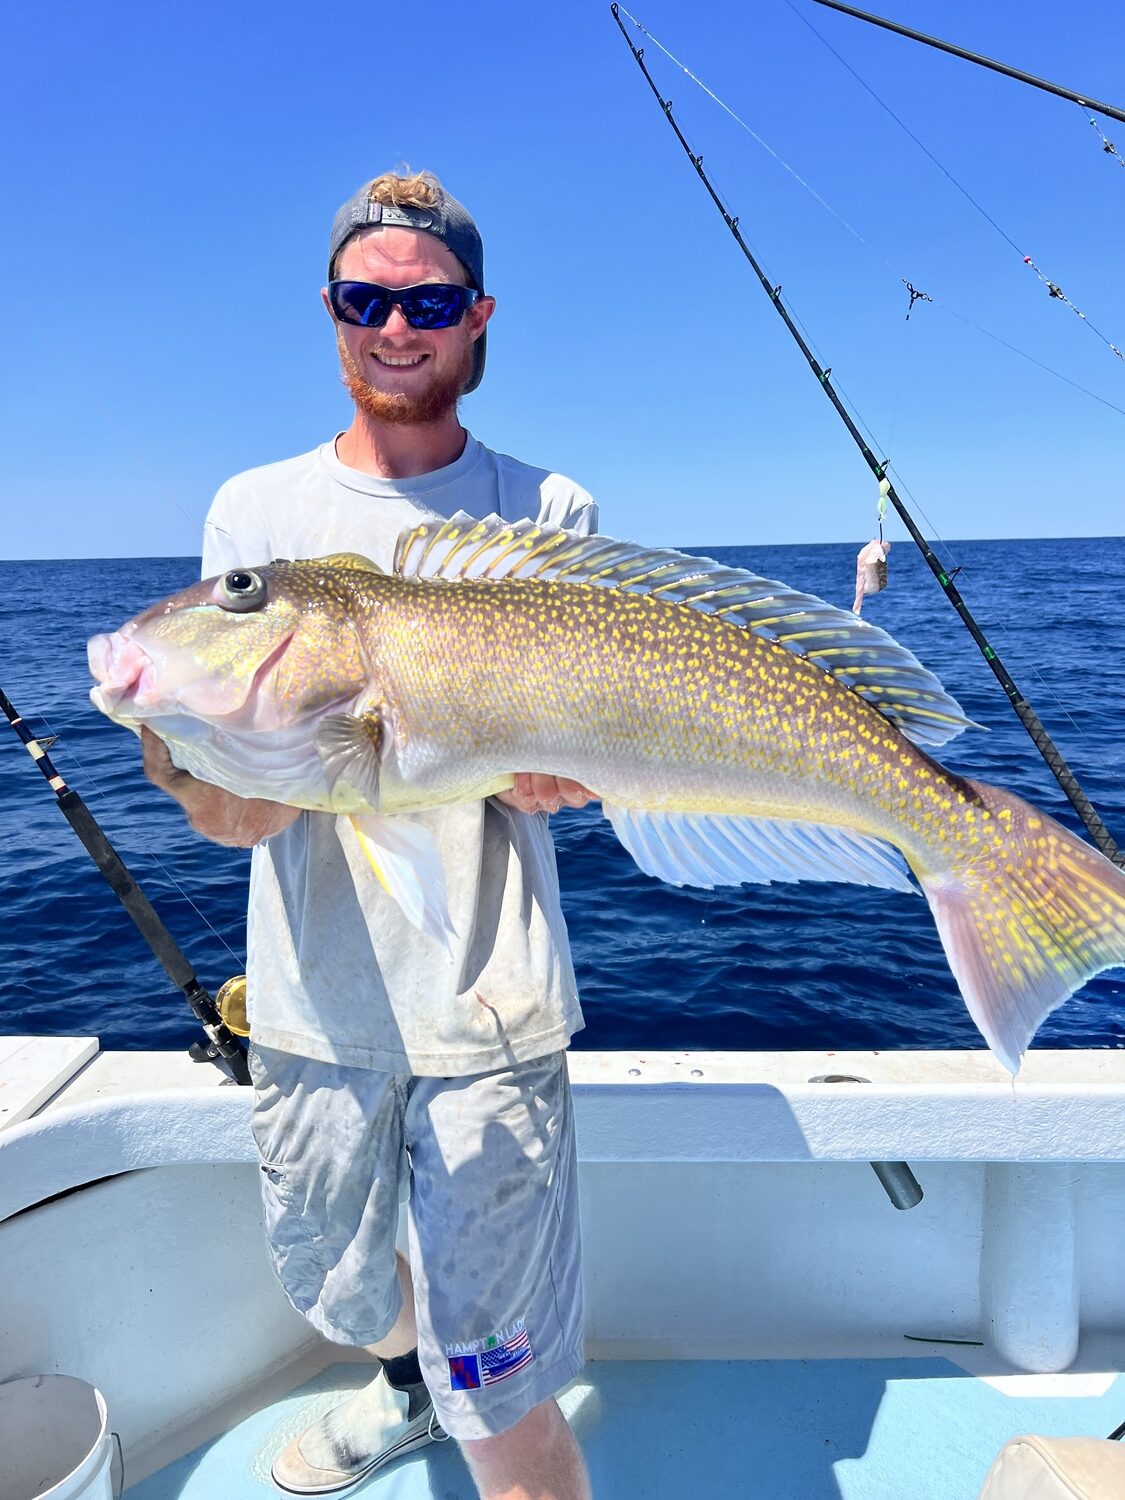 Billy Longnecker with a fine specimen of the delicious golden tilefish.  JIM FOLEY